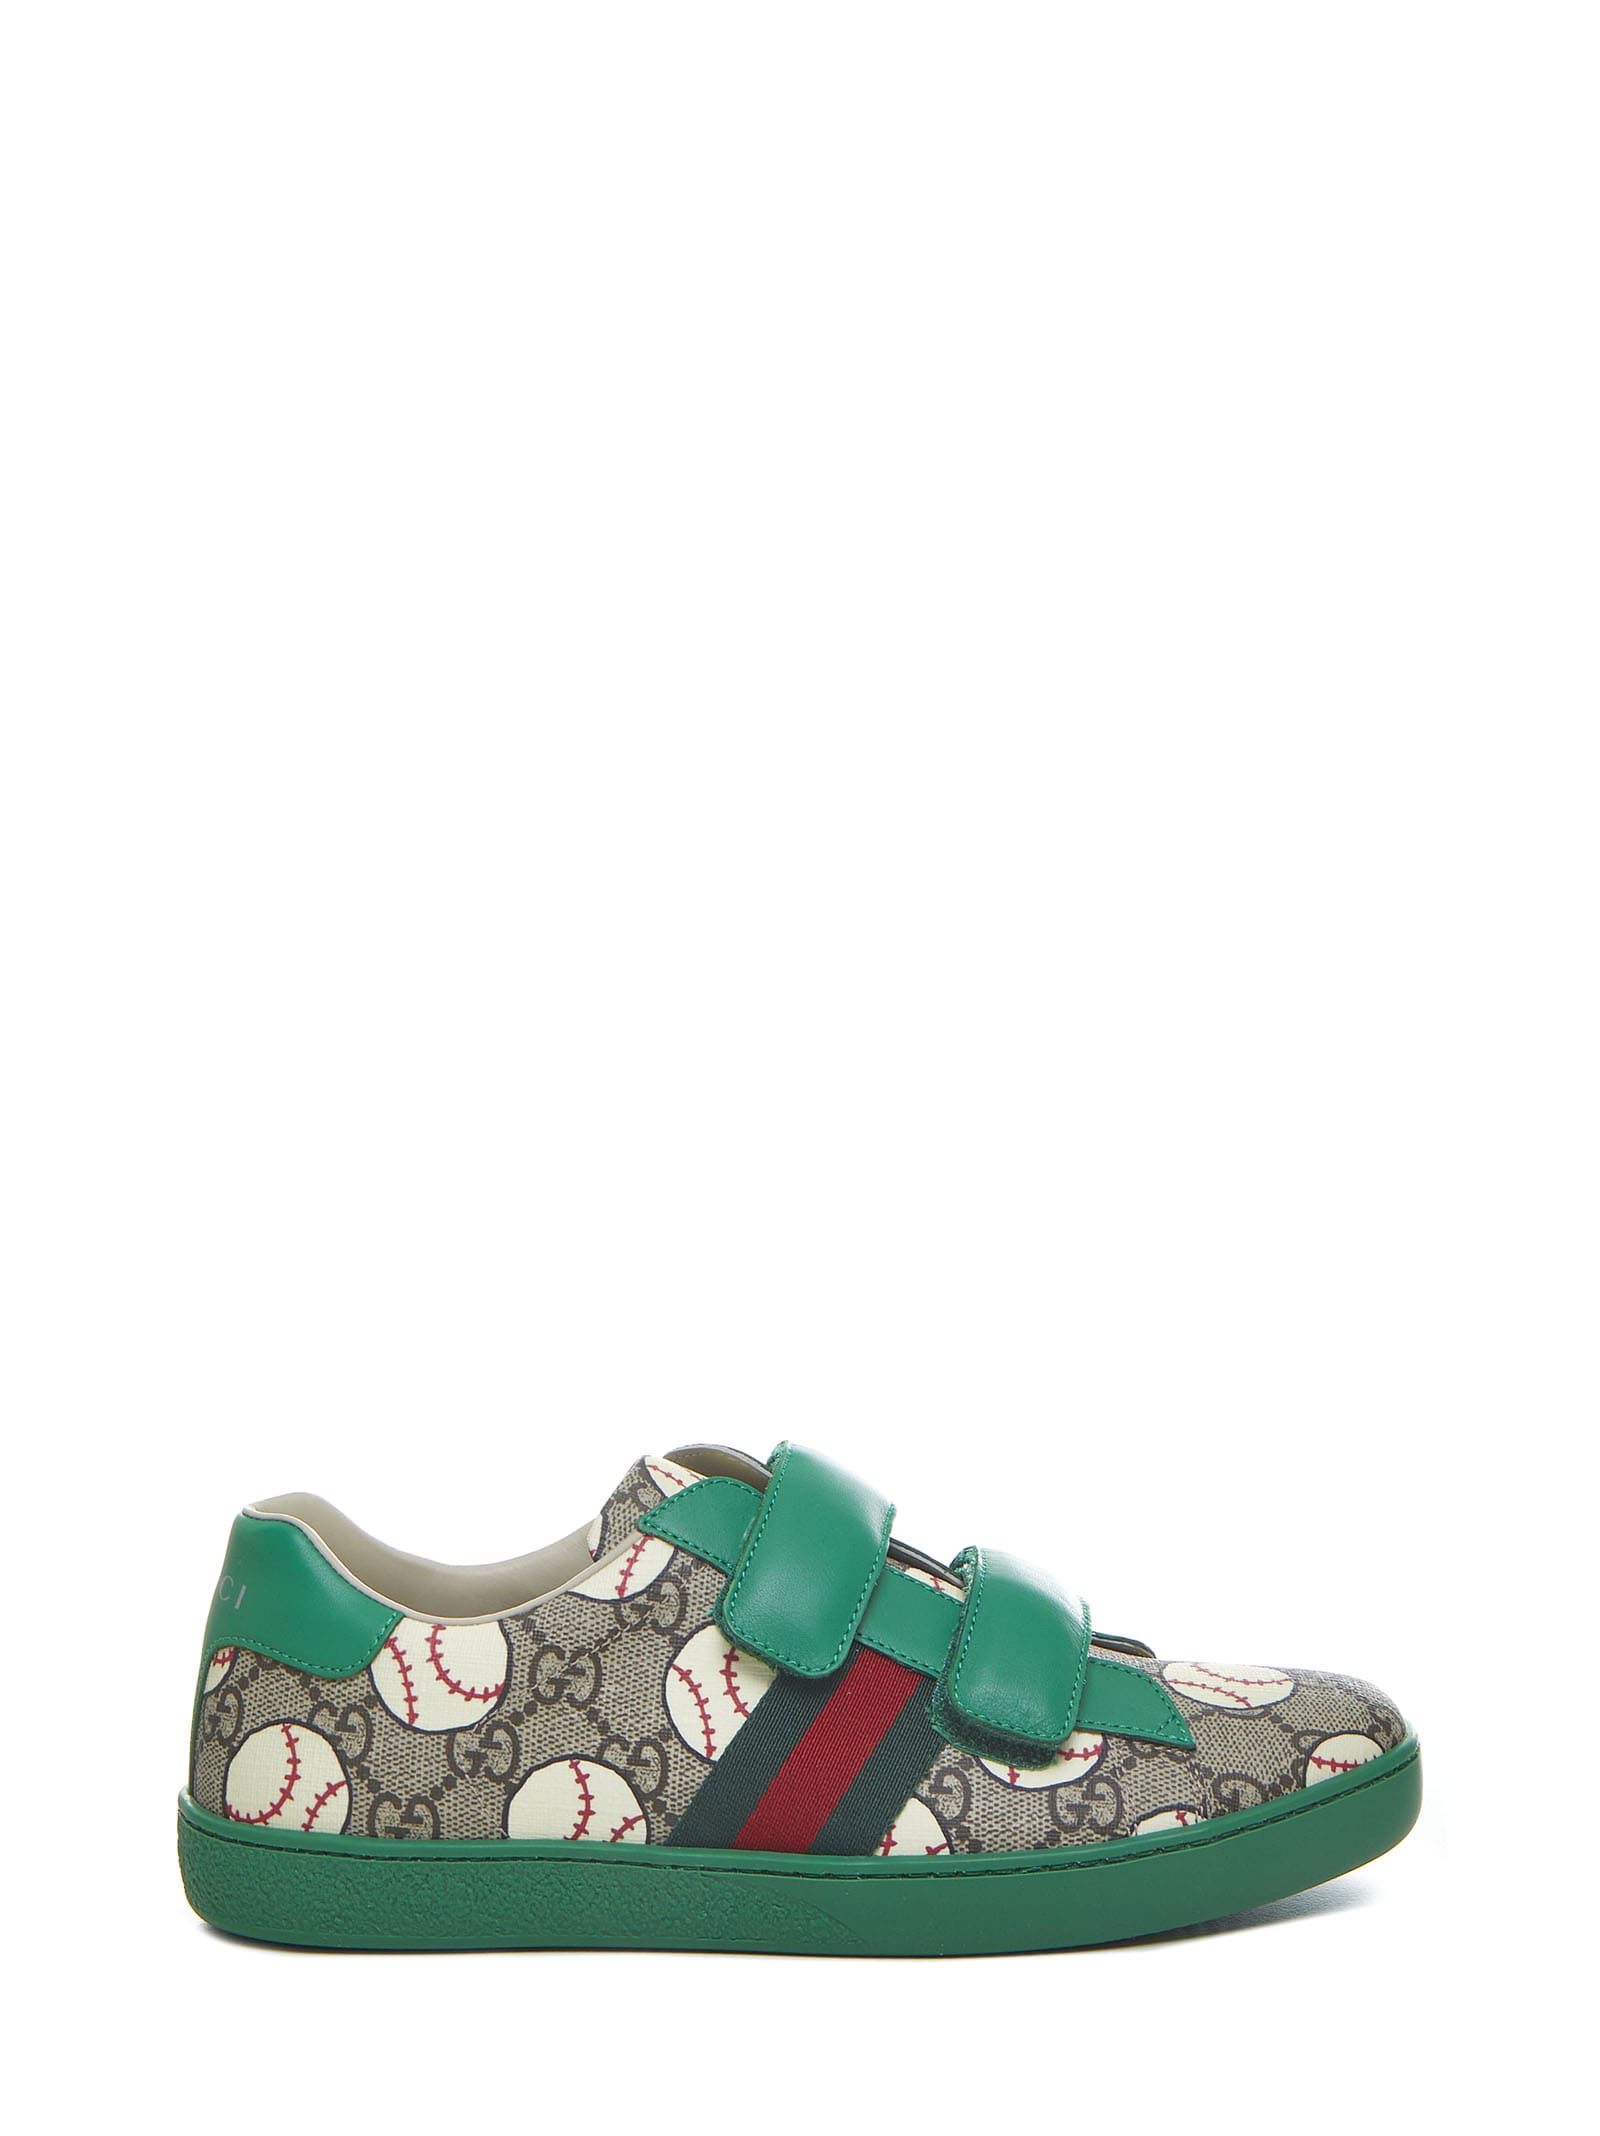 Gucci Junior Ace Sneakers